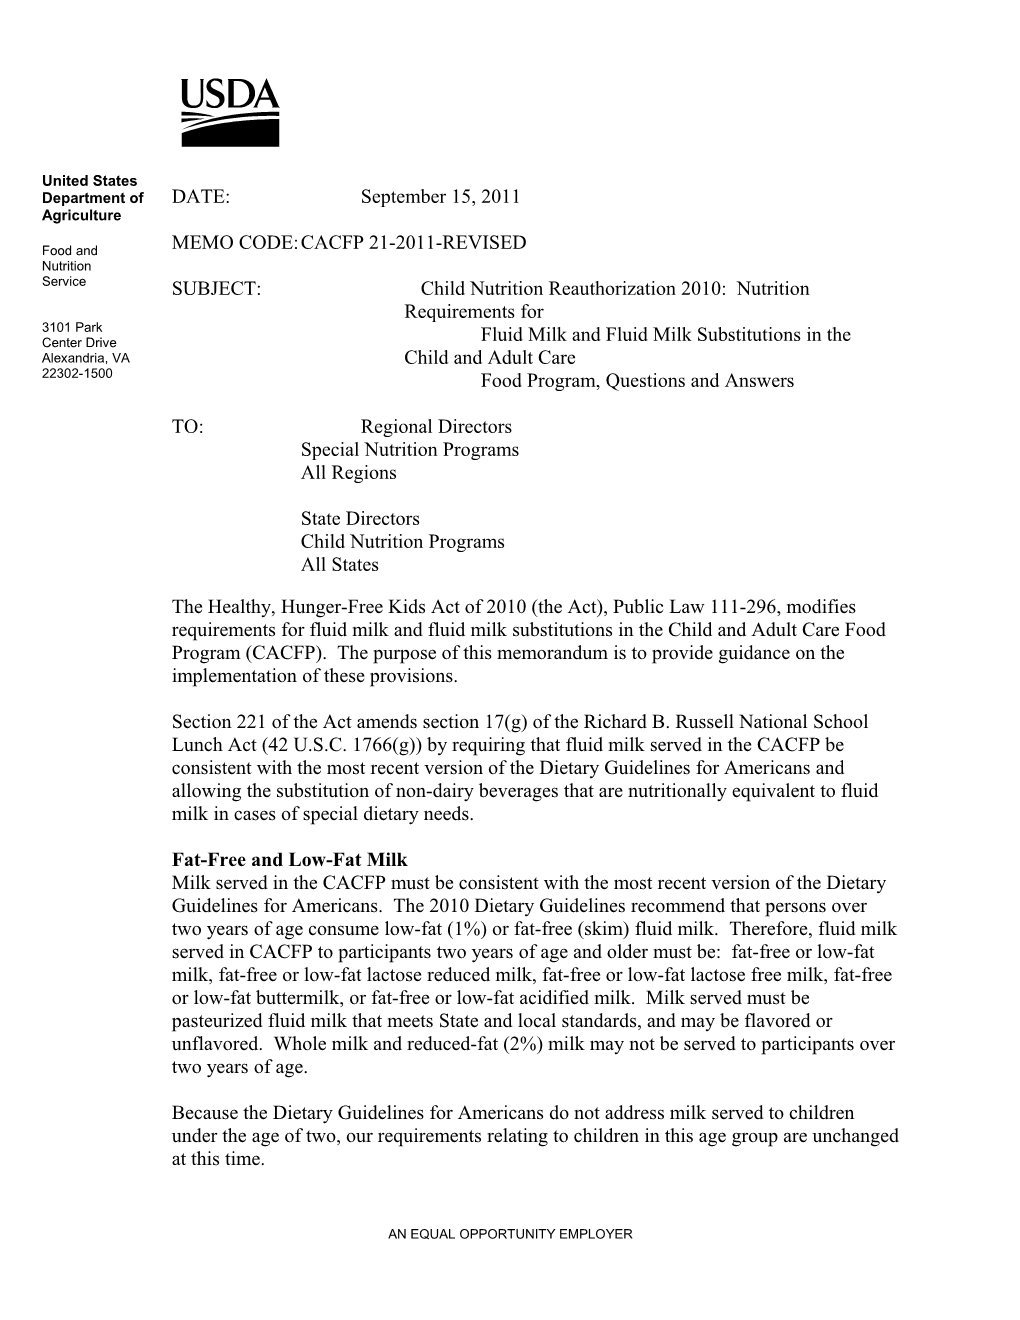 SUBJECT:Child Nutrition Reauthorization 2010: Nutrition Requirements For